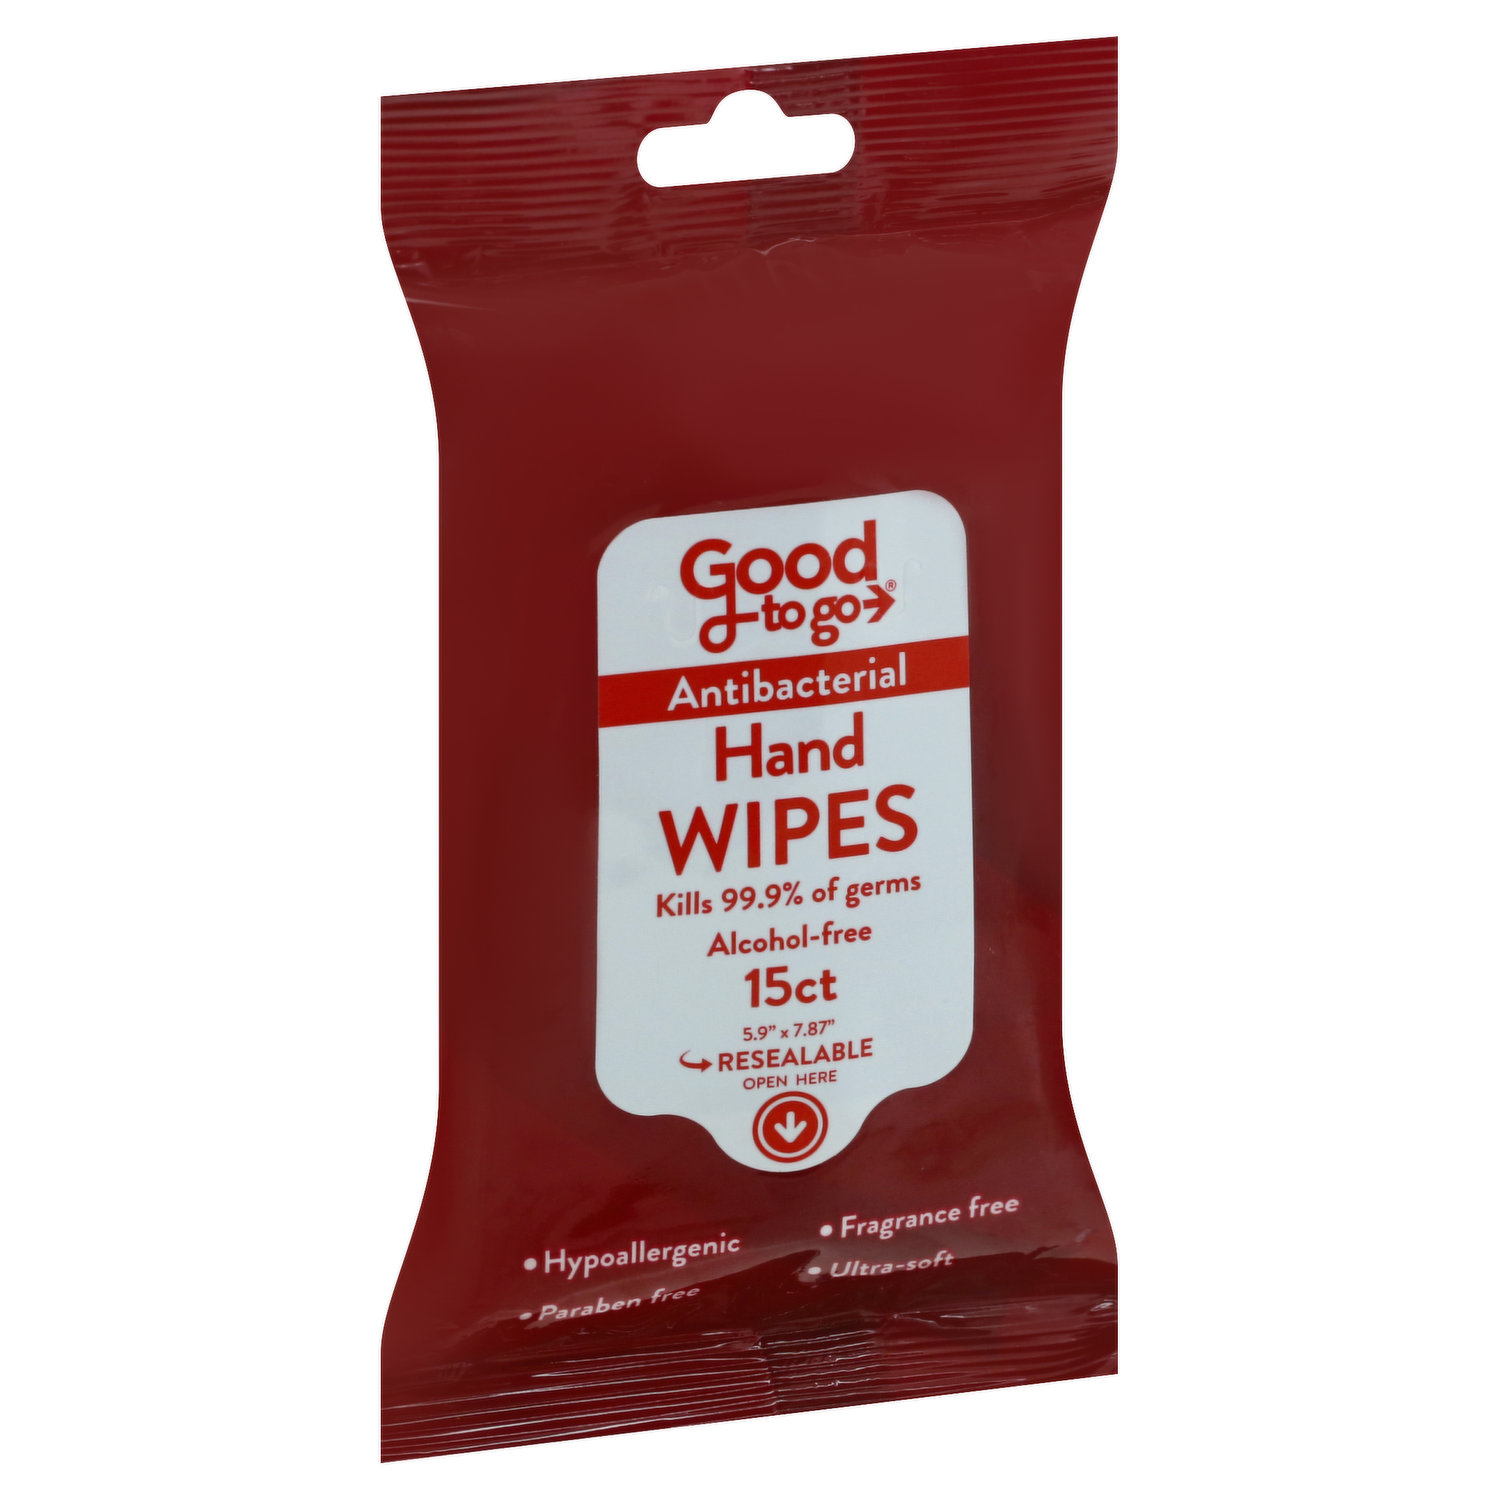 FOR:GOOD HAND WIPES Antibacterial Hand Wipes